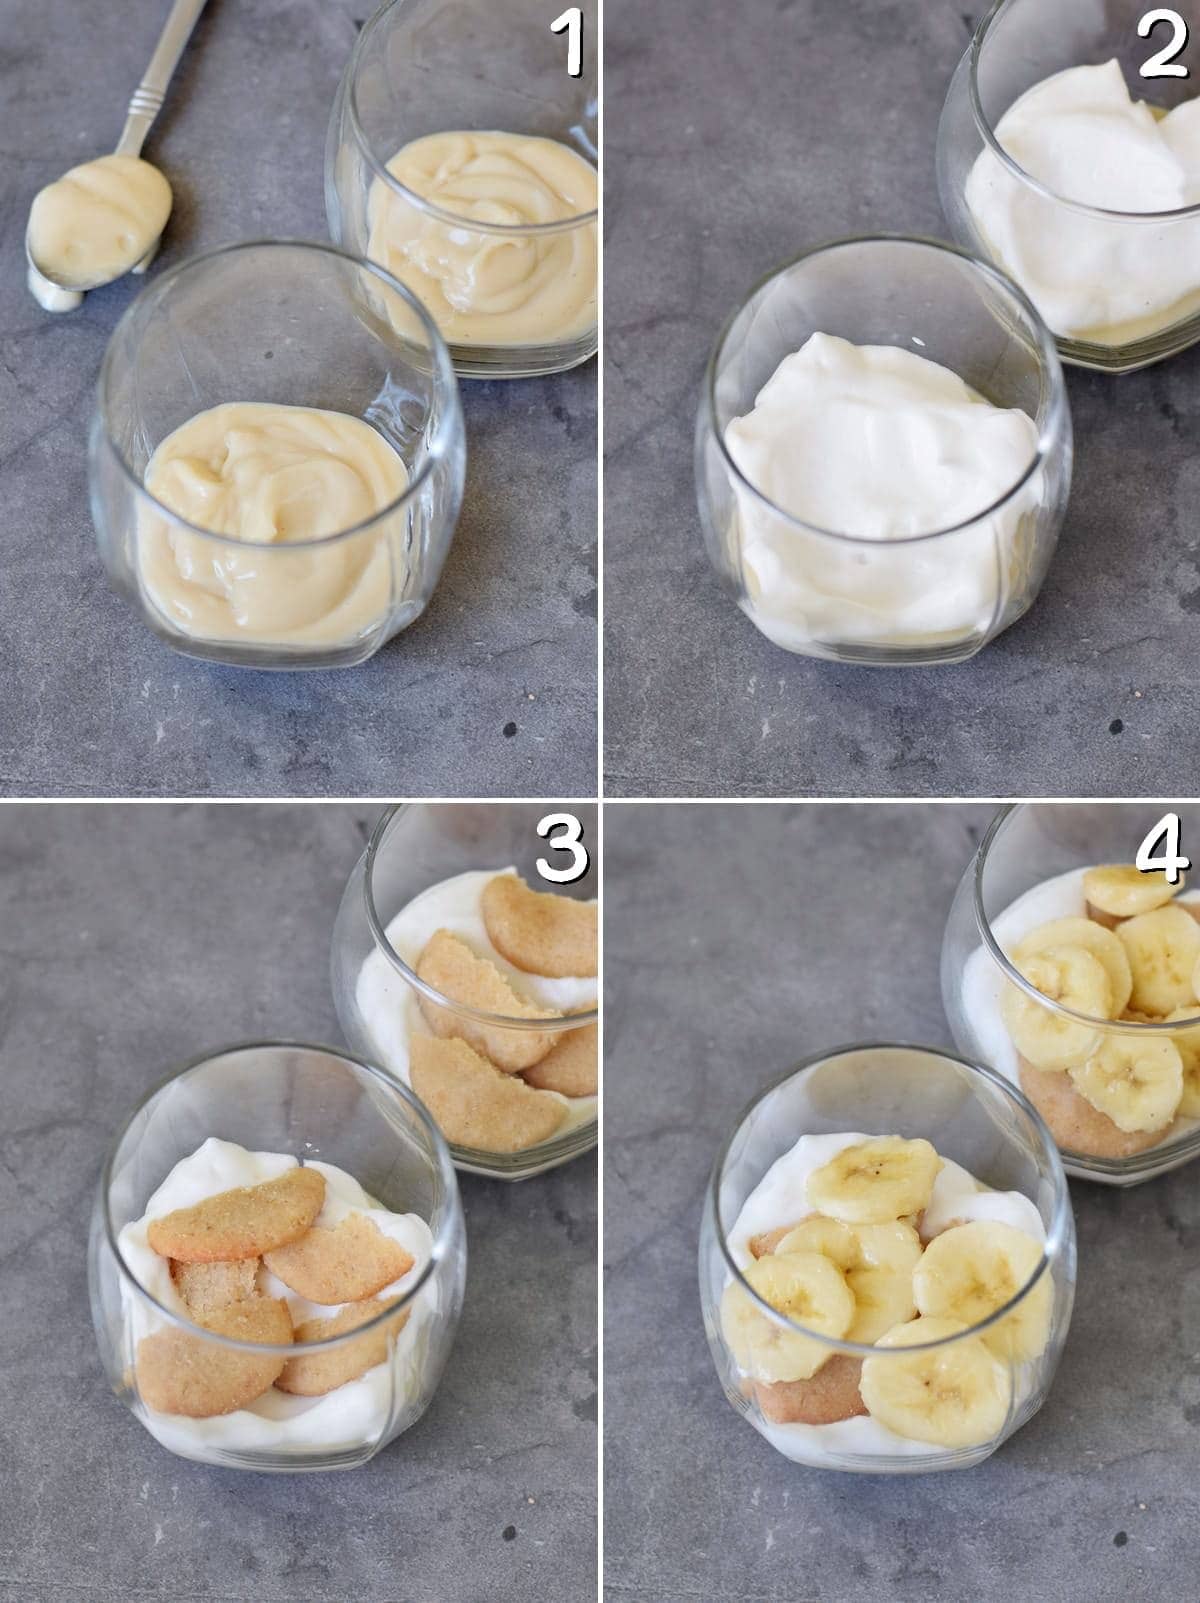 4 step-by-step photos showing how to layer a dessert with custard whipped cream vanilla wafers and bananas